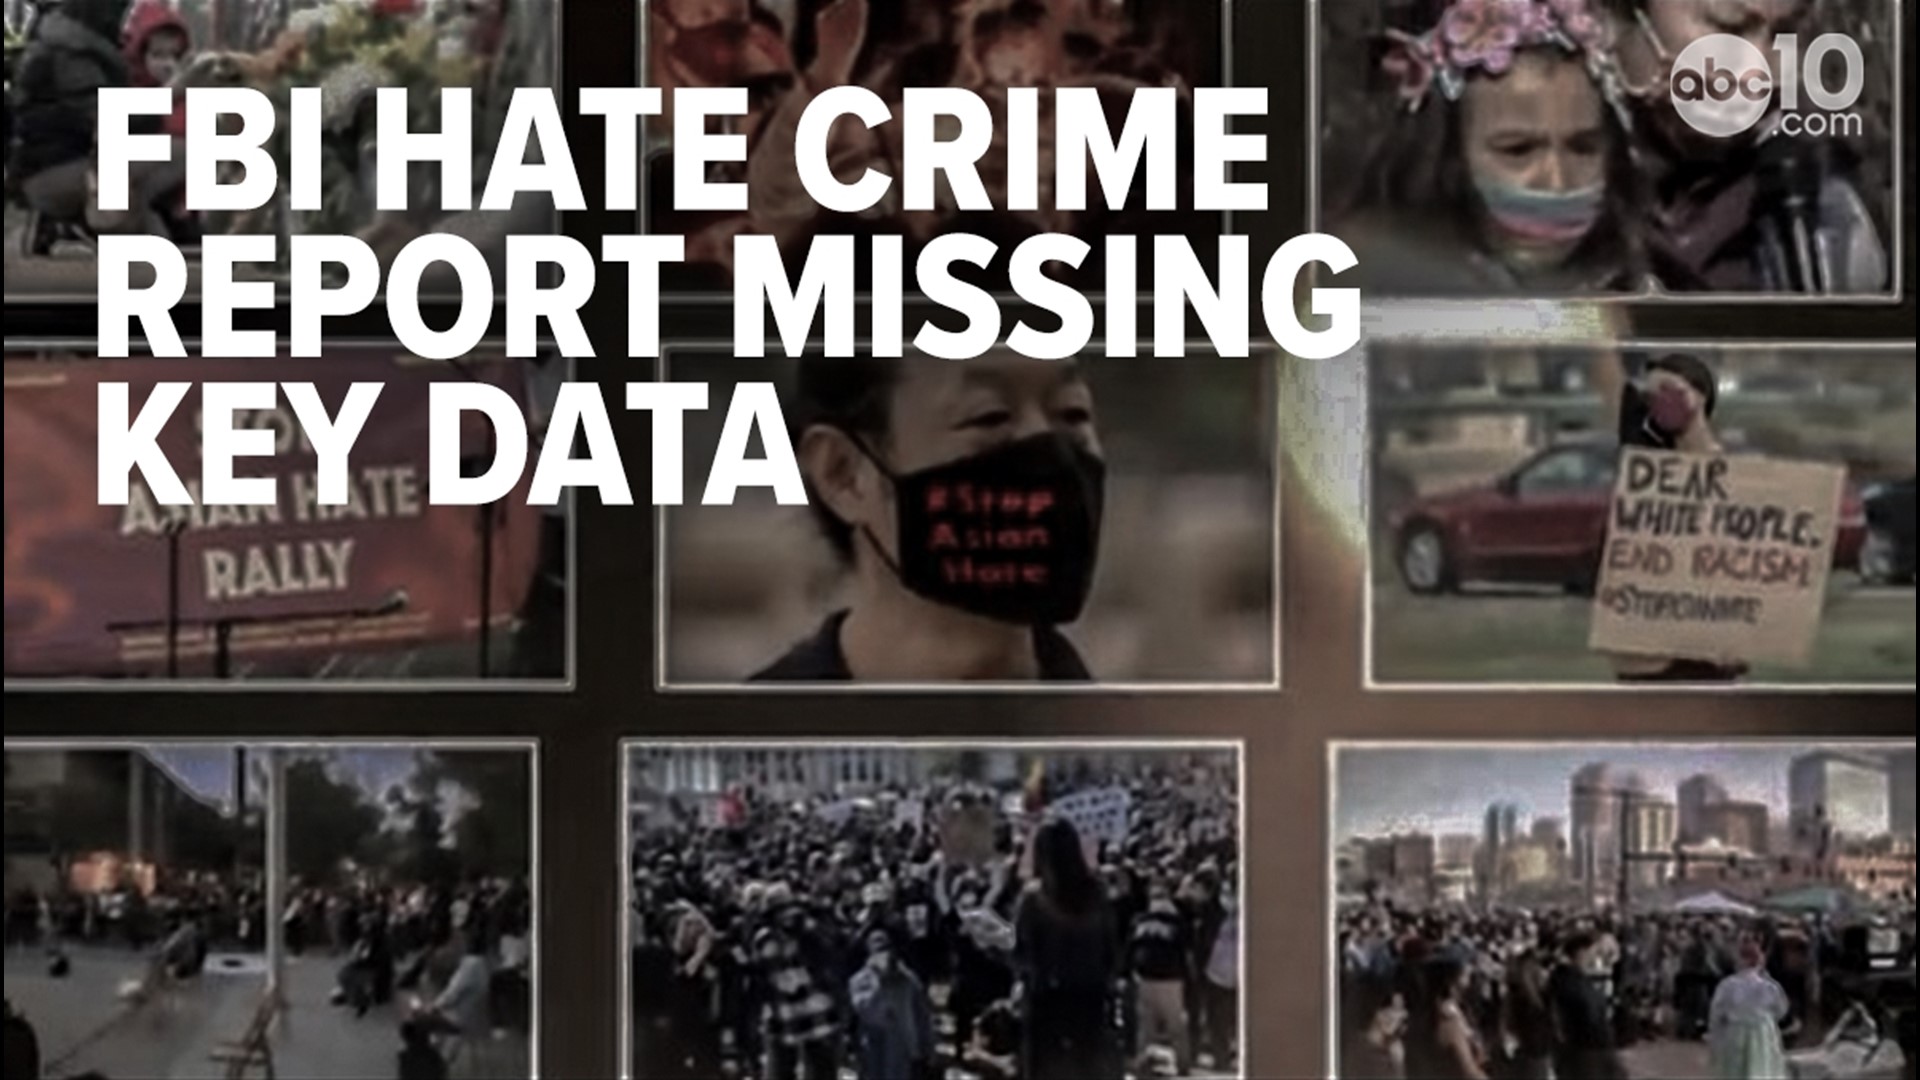 Only 65% of law enforcement agencies provided data to the FBI for its annual report, leaving an inaccurate picture of hate crime across the country.